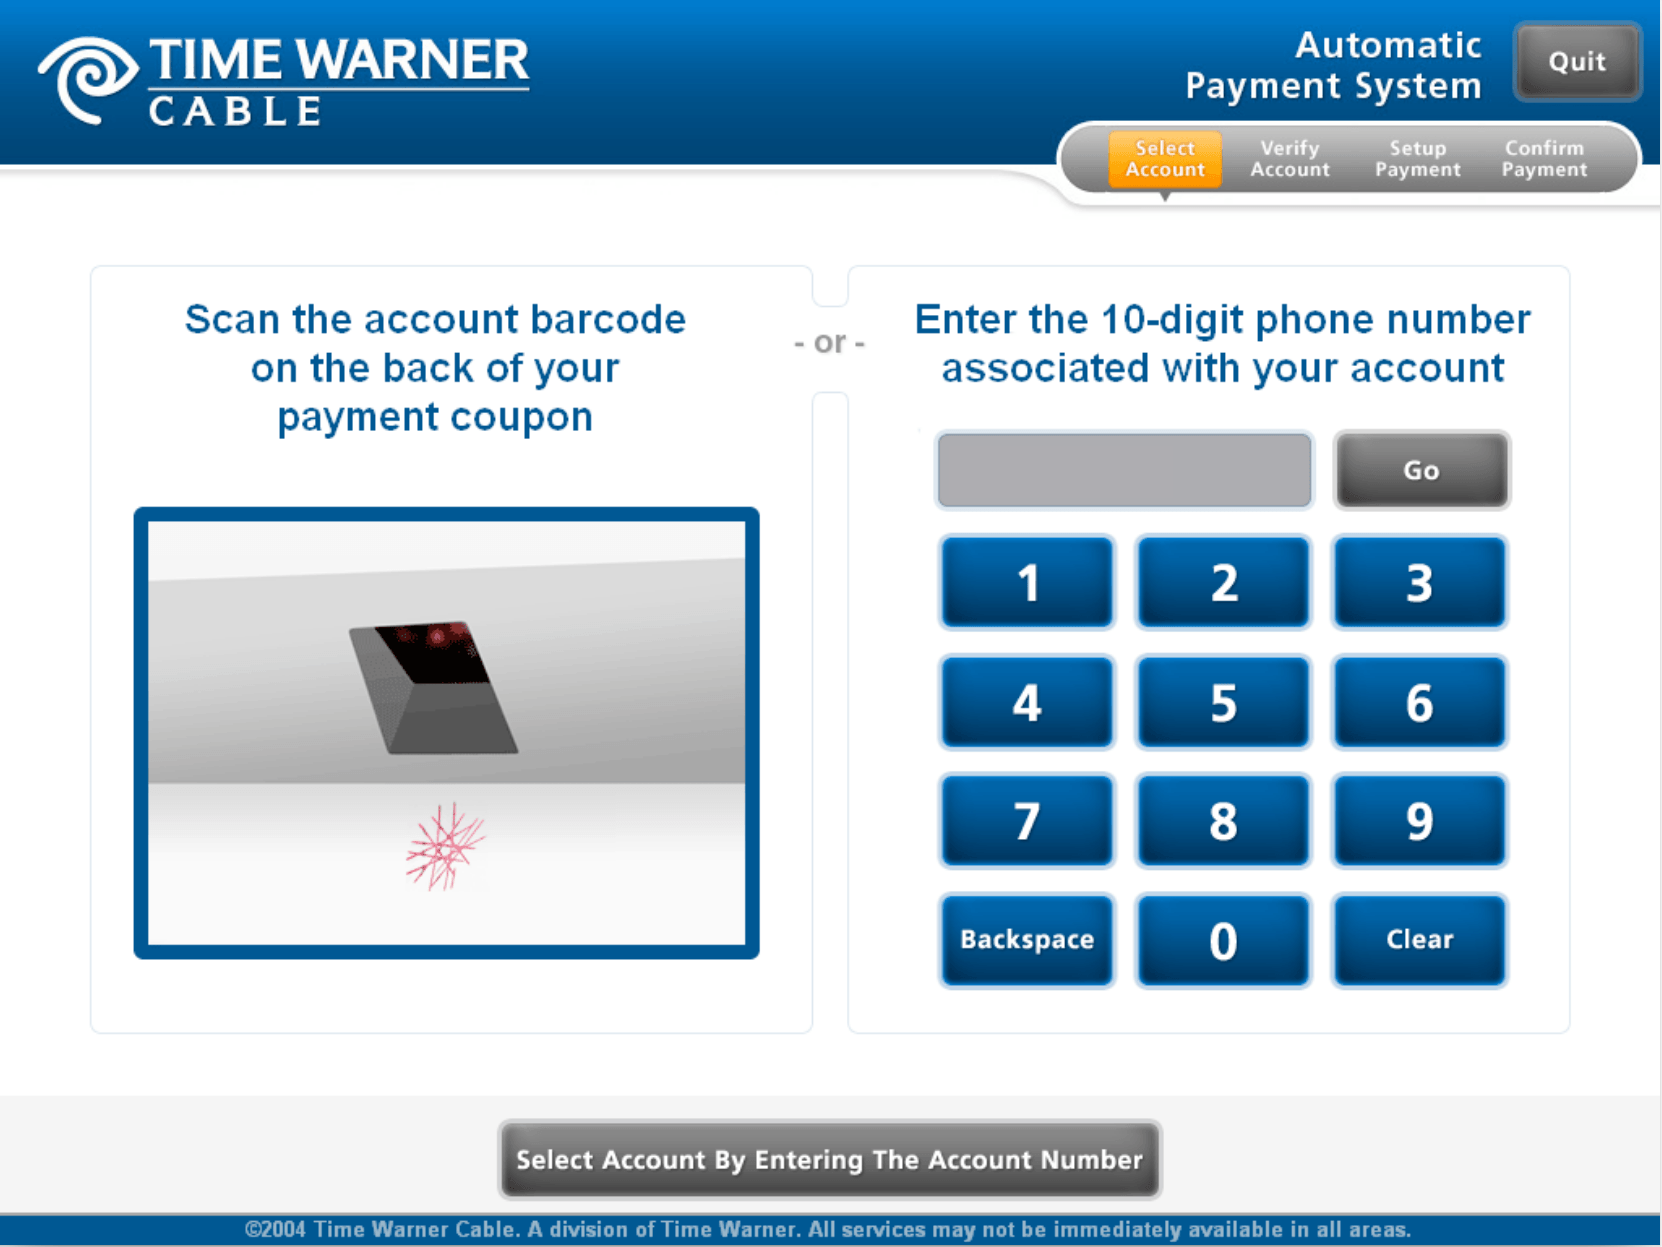 Time Warner Cable payment kiosk login screen showing different payment option